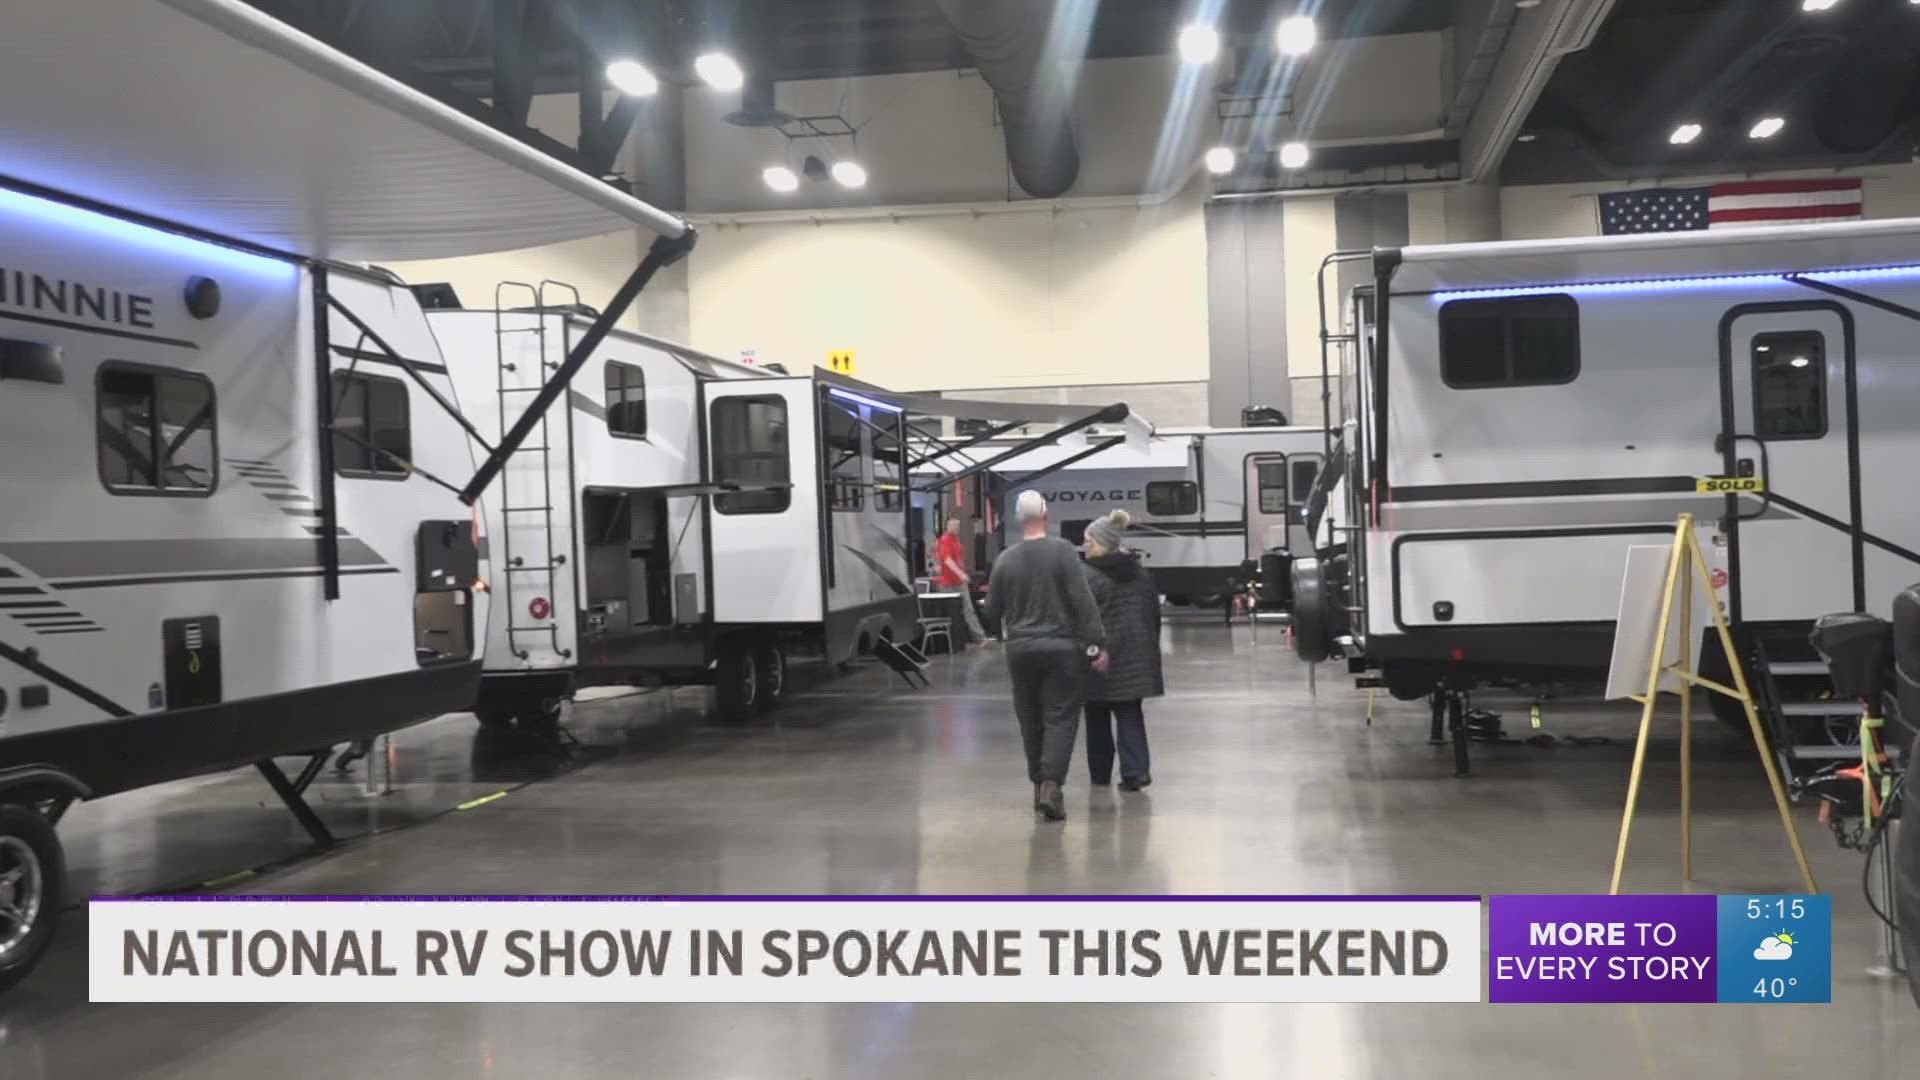 The show runs for five days. It started on Thursday and will end on Monday 16th. The event takes place at the Spokane Convention Center and entrance is free.